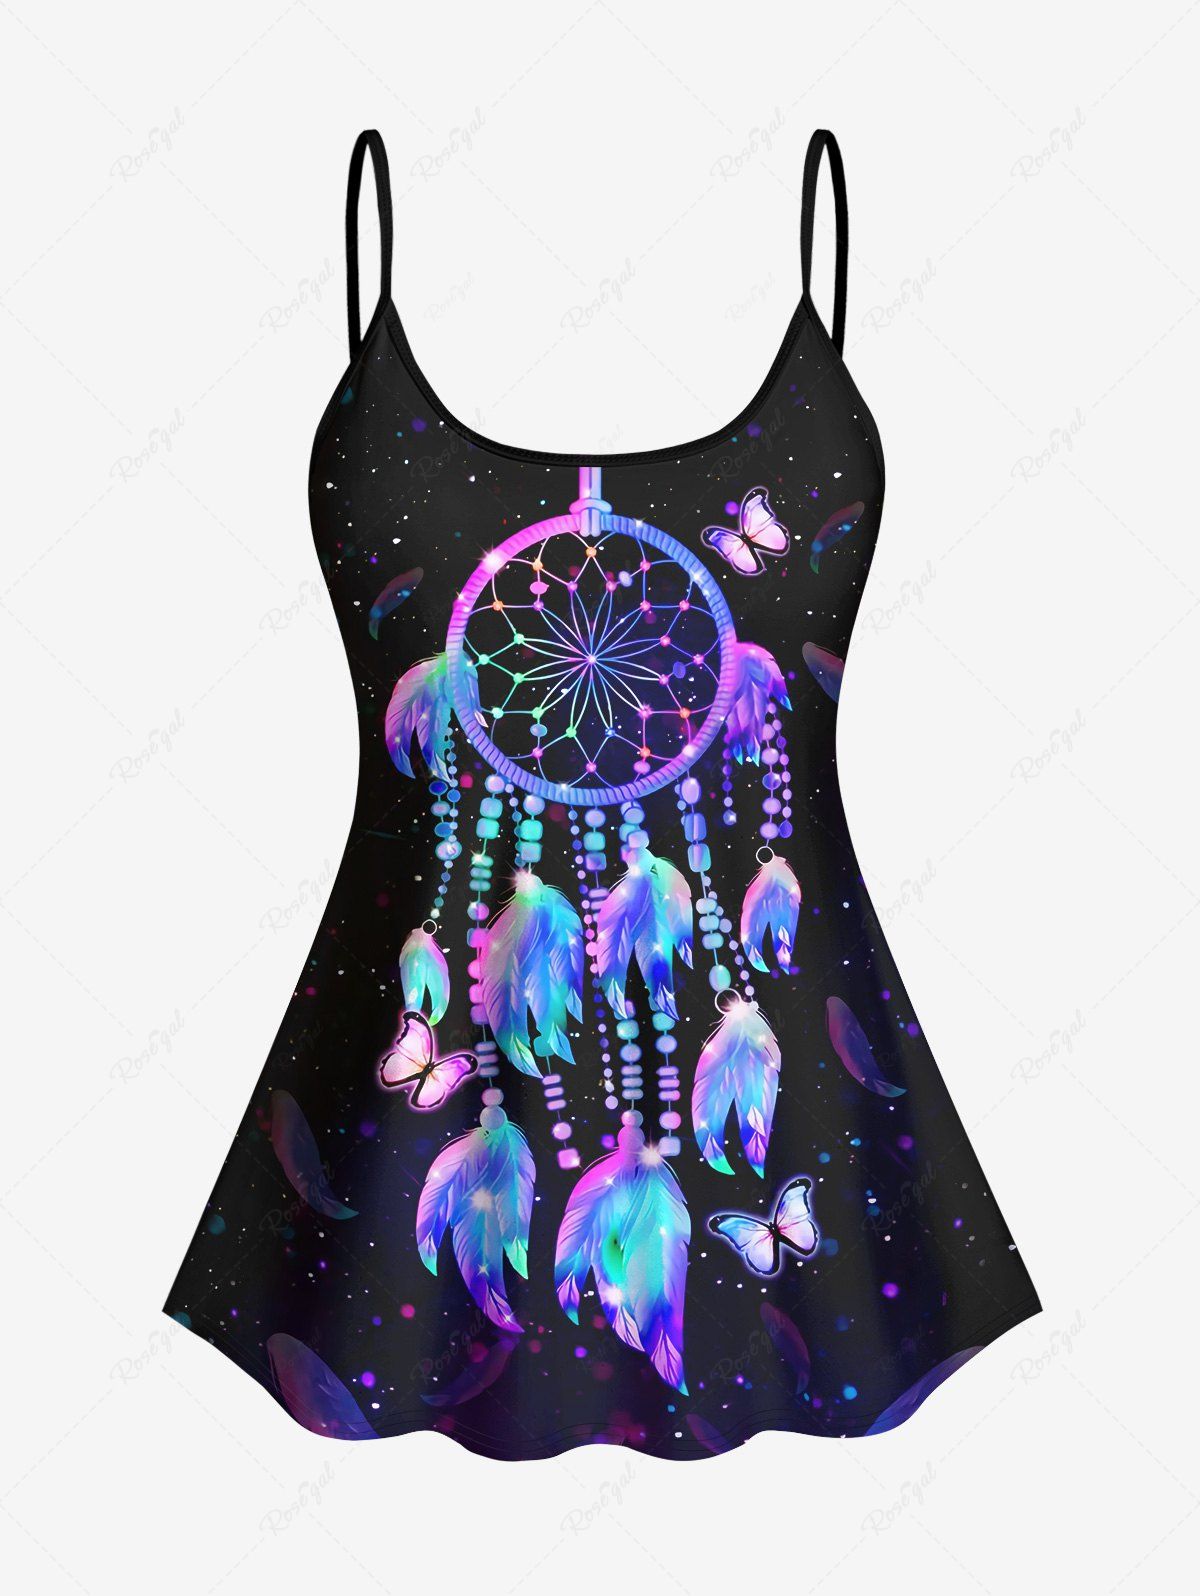 Shop Fashion Glitter Colorful Feather Dreamcatcher Butterfly Galaxy Print Tankini Top(Adjustable Shoulder Strap)  